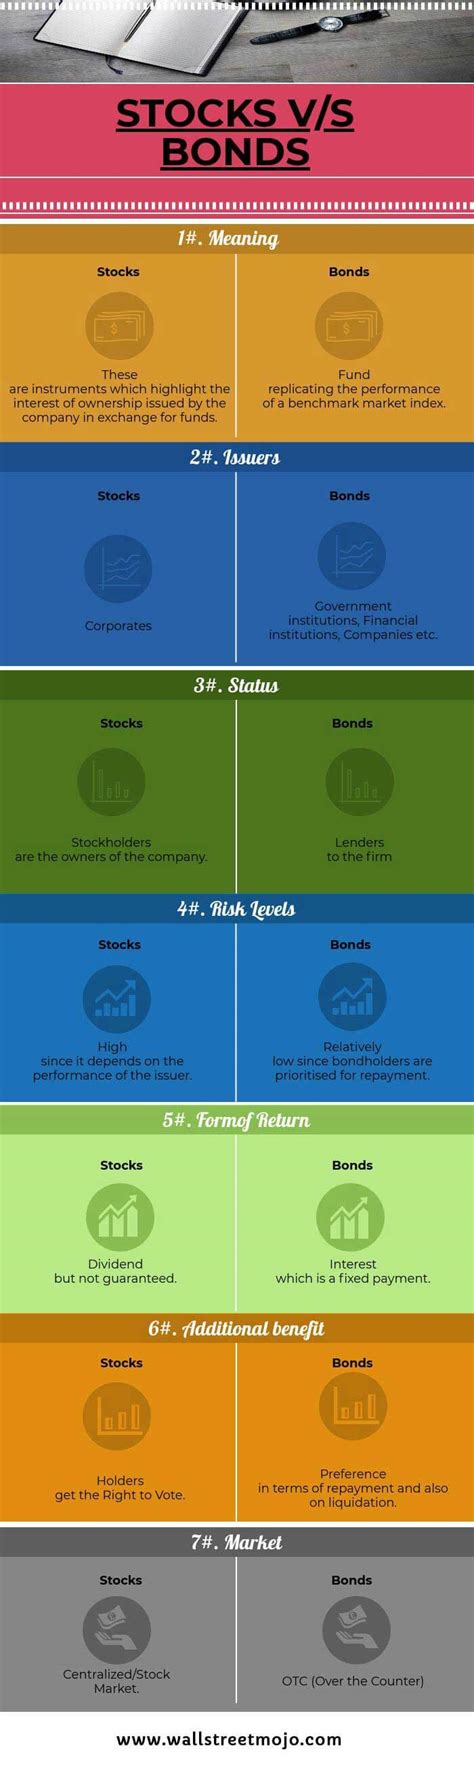 The choice of whether to invest in stocks or bonds is a personal one, and there is no simple answer. Stocks vs Bonds | Top 7 Differences Between Stocks and Bonds